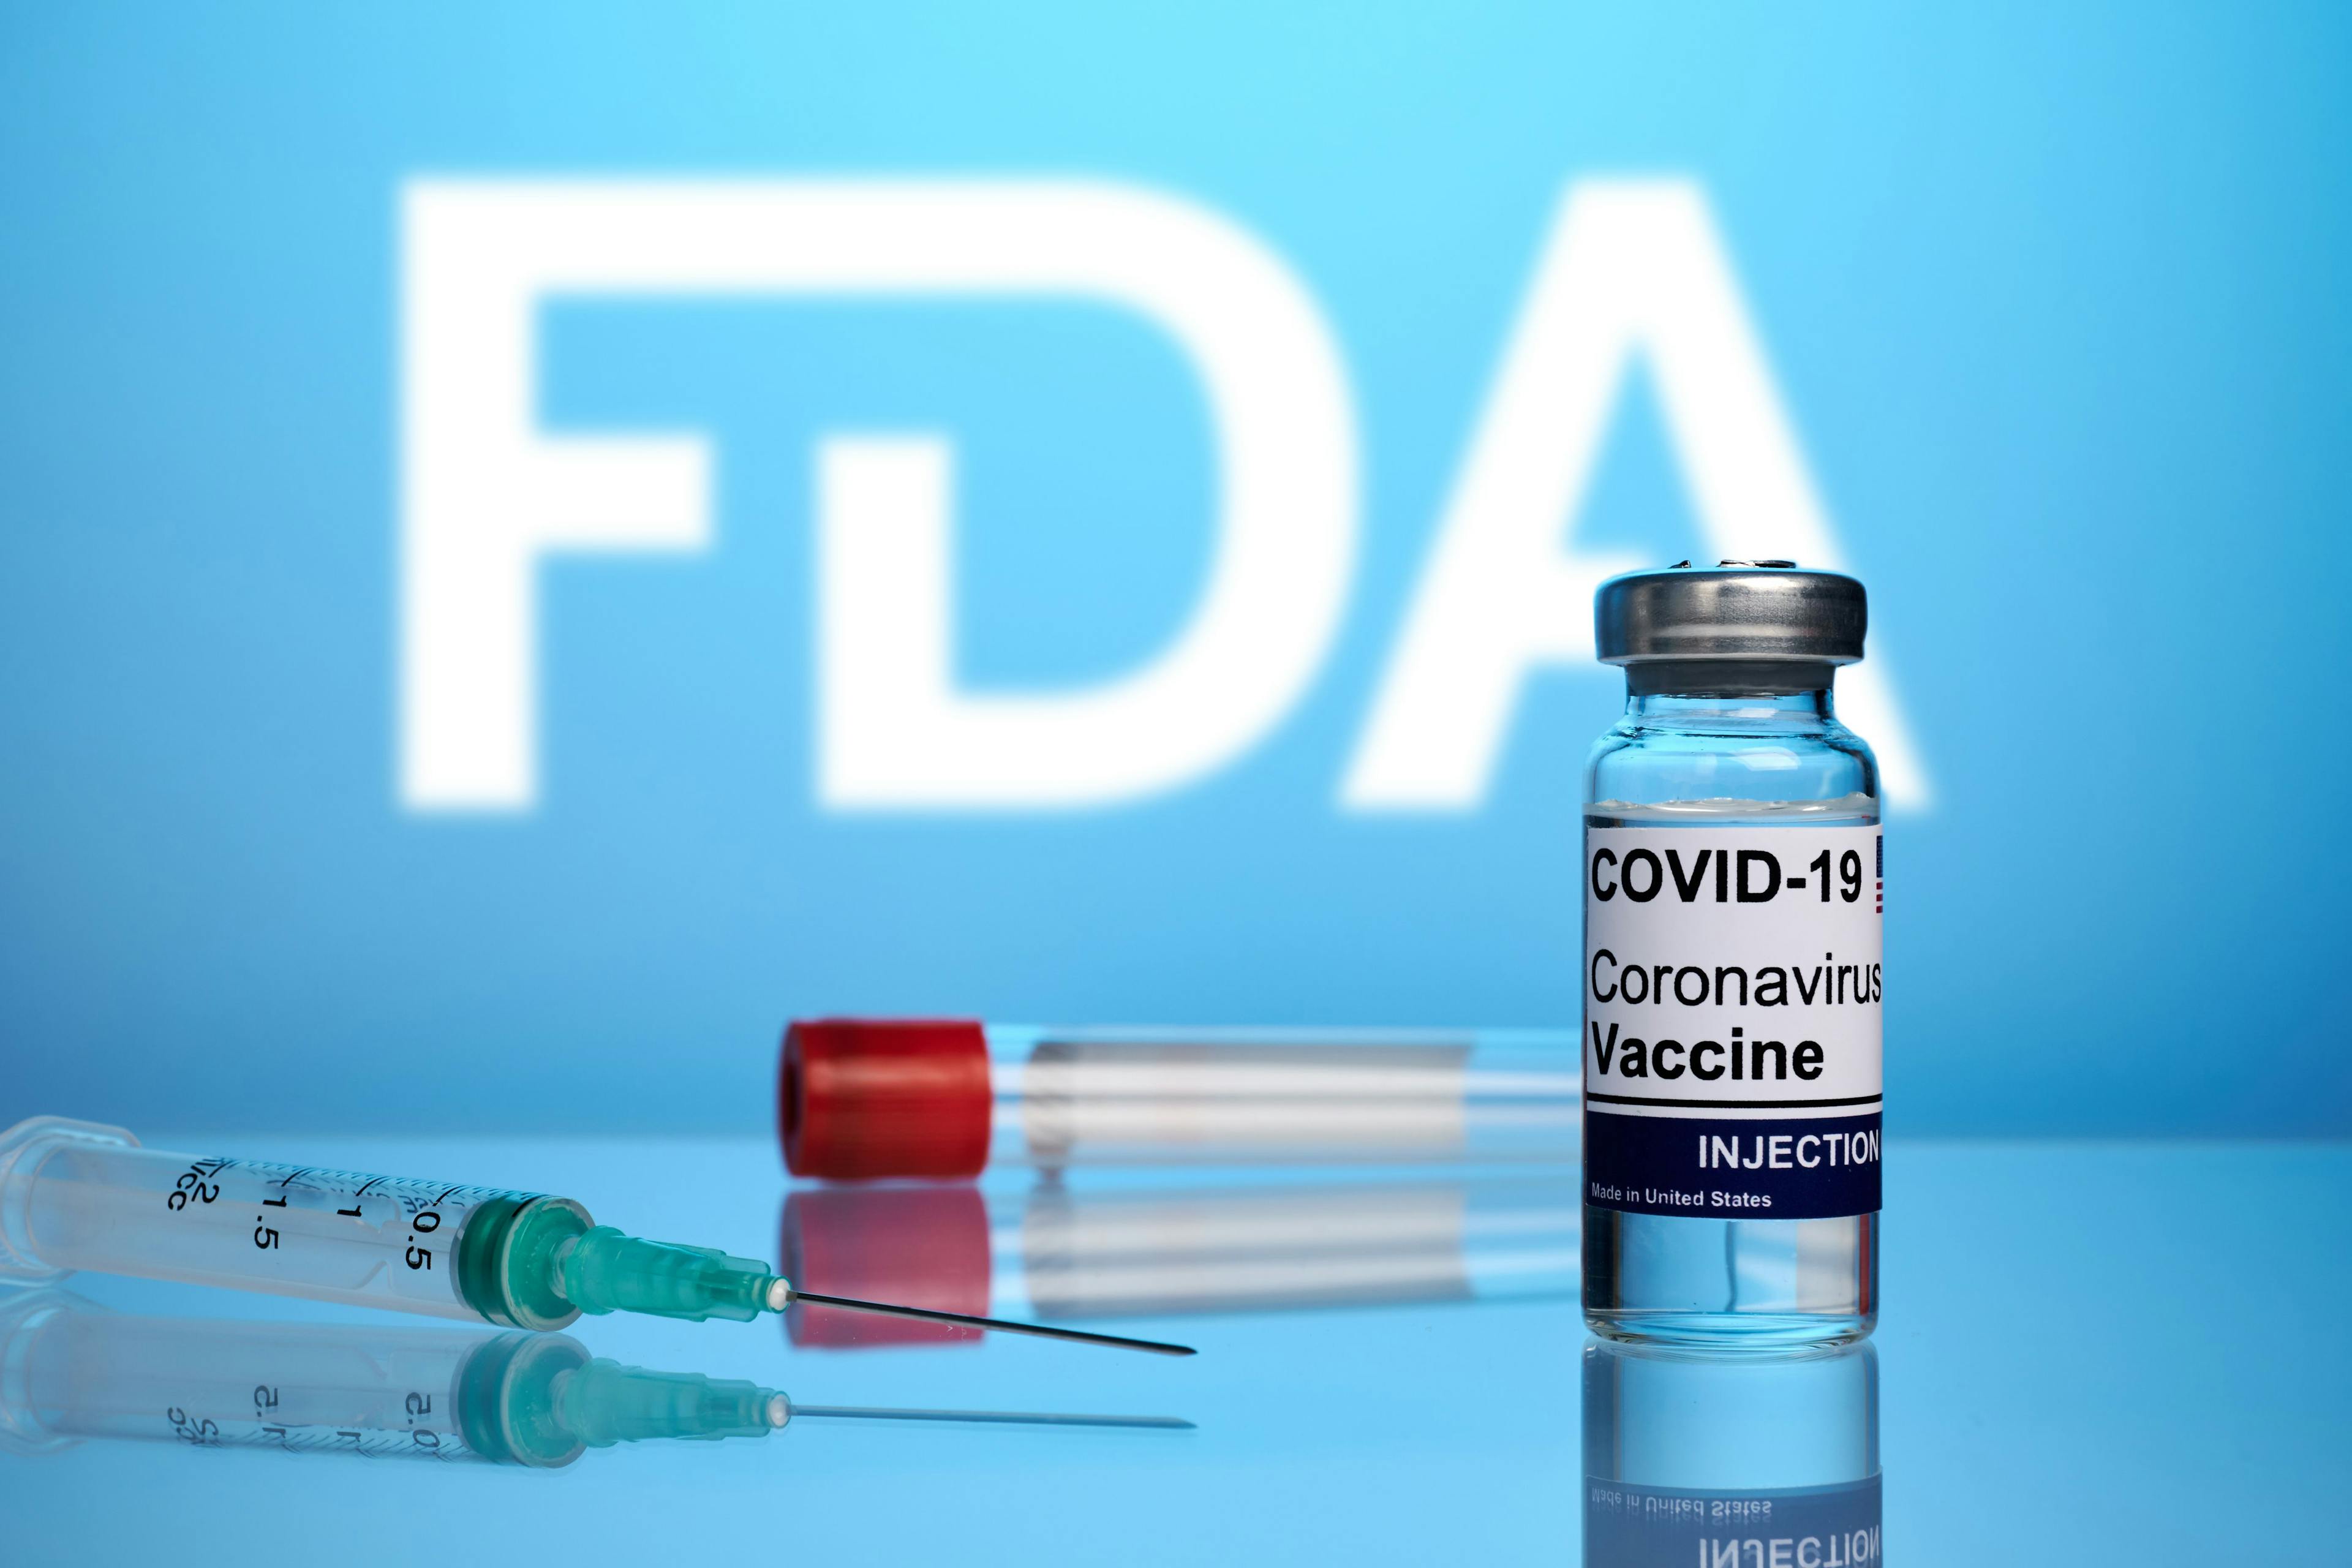 The FDA’s Vaccines and Related Biological Products Advisory Committee (VRBPAC) unanimously voted 2023-2024 COVID-19 vaccines should be updated to a monovalent XBB strain.